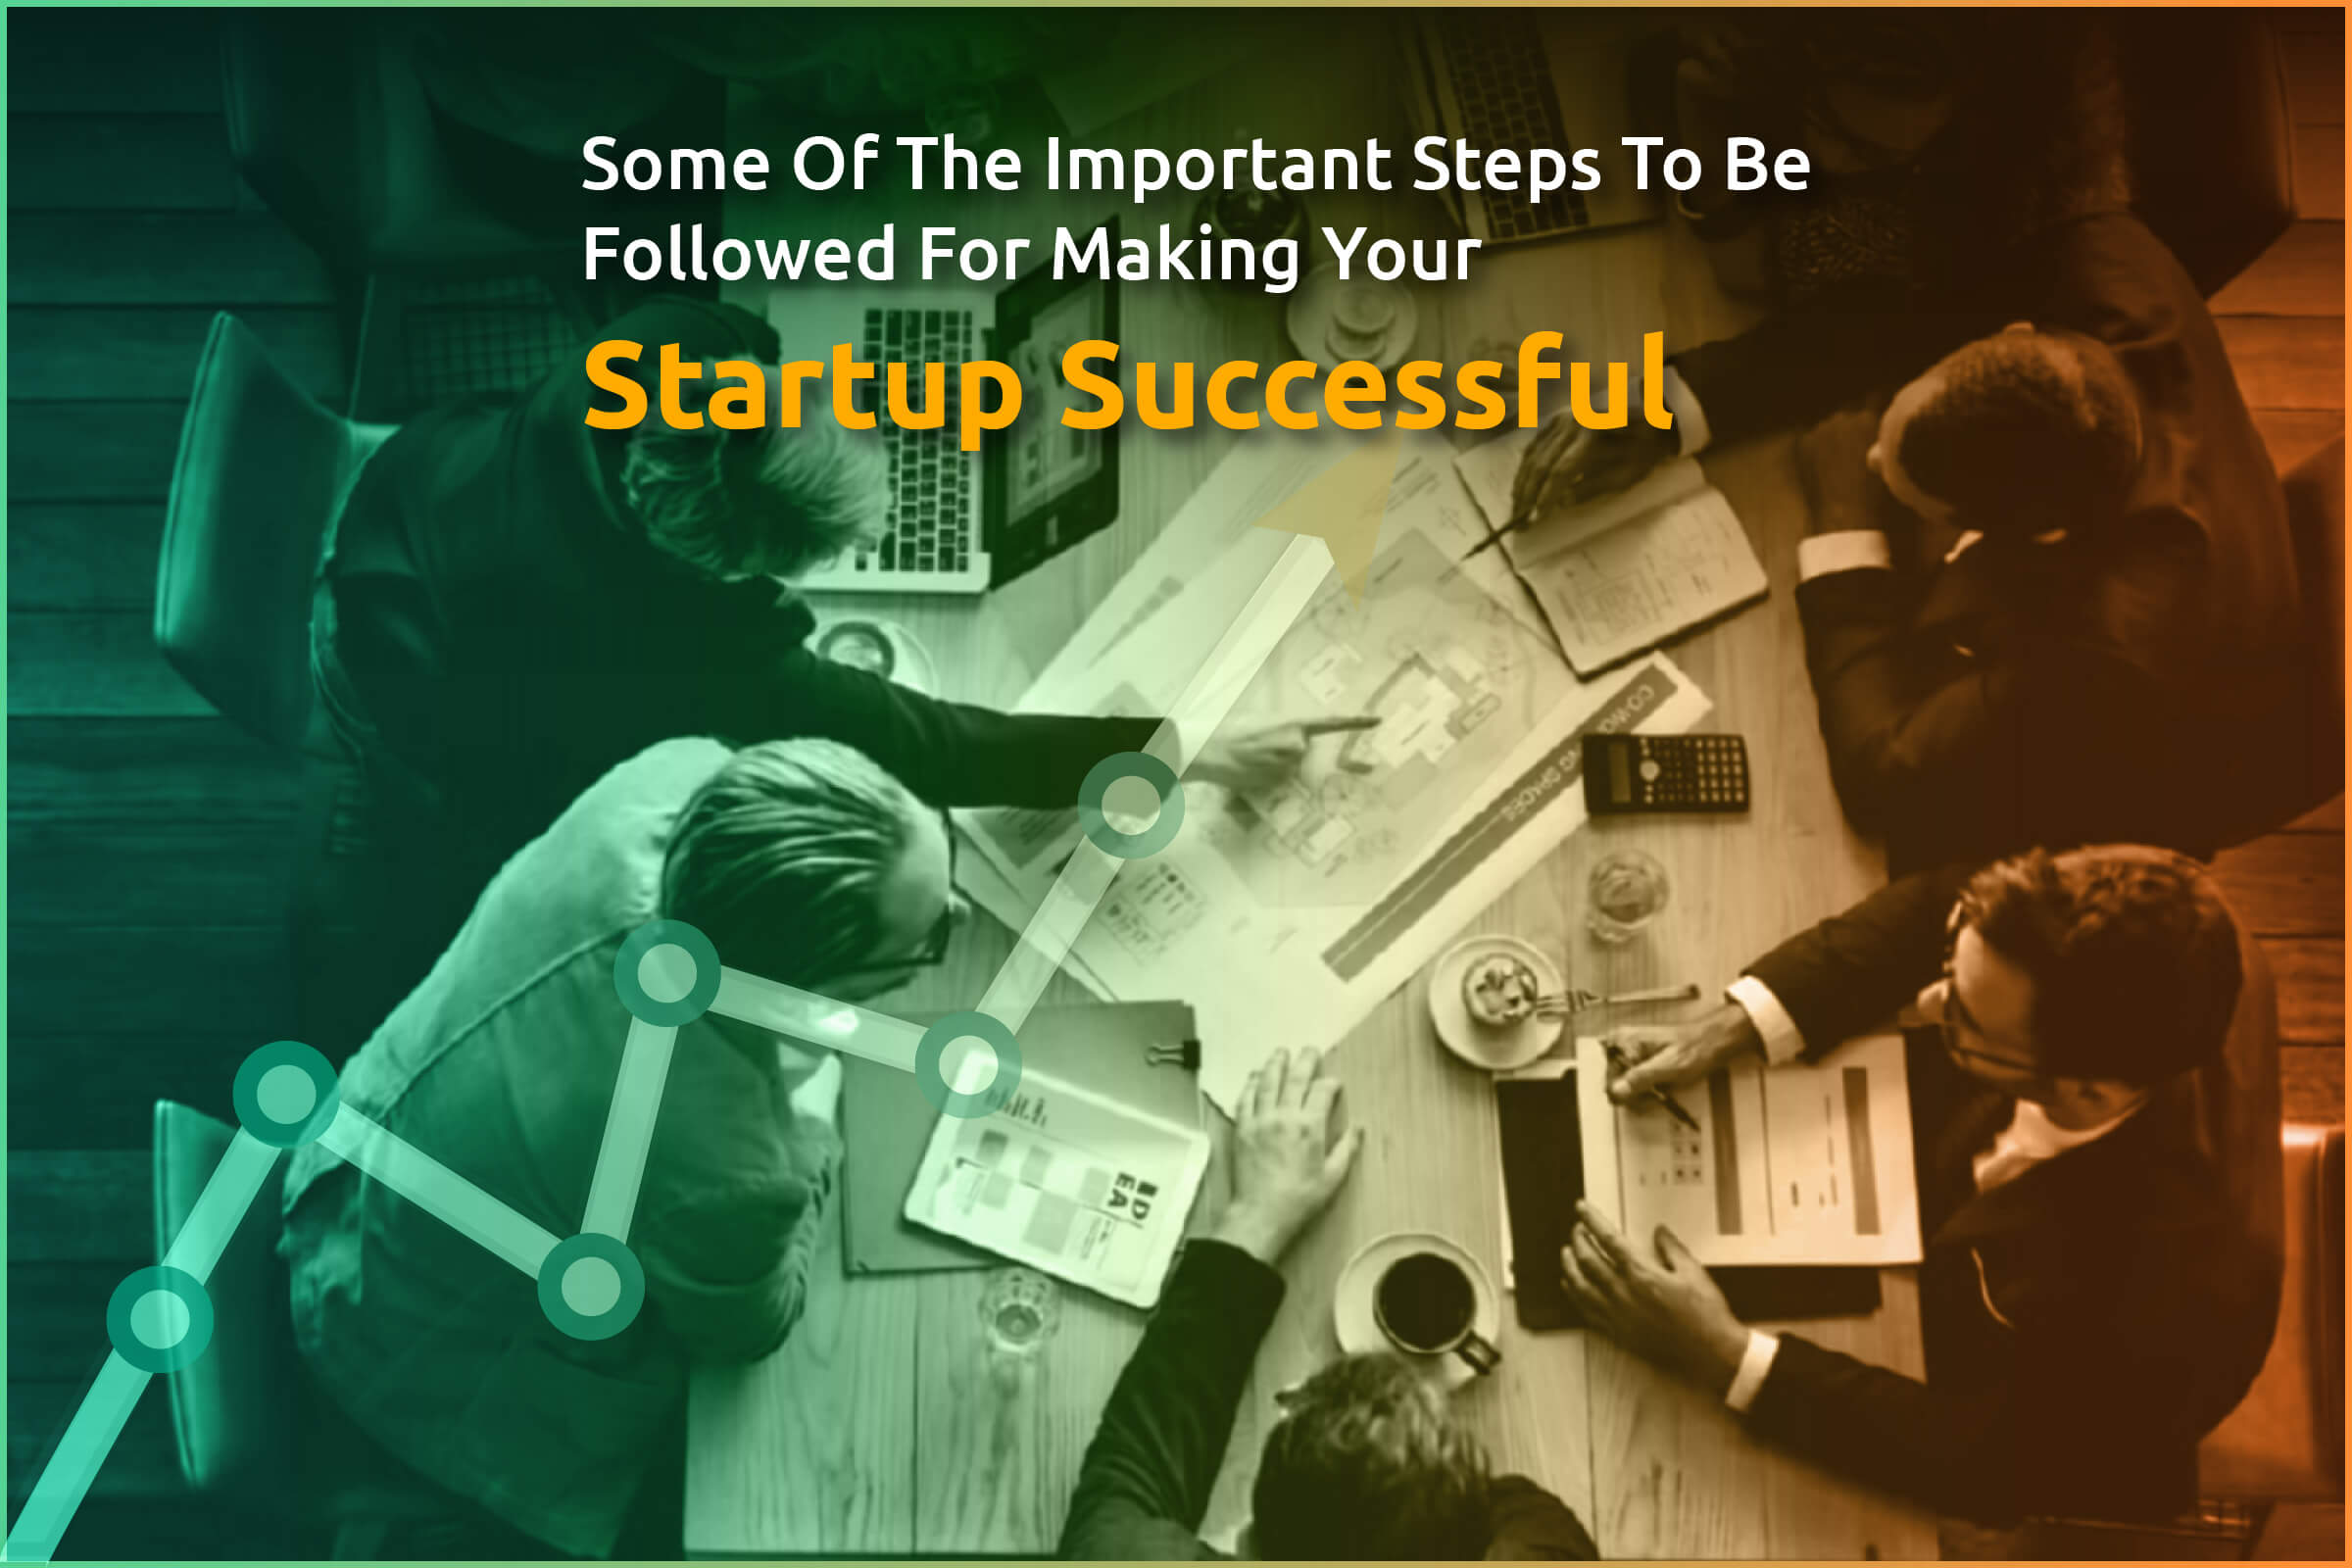 Some of the important steps to be followed for making your Startup Successful